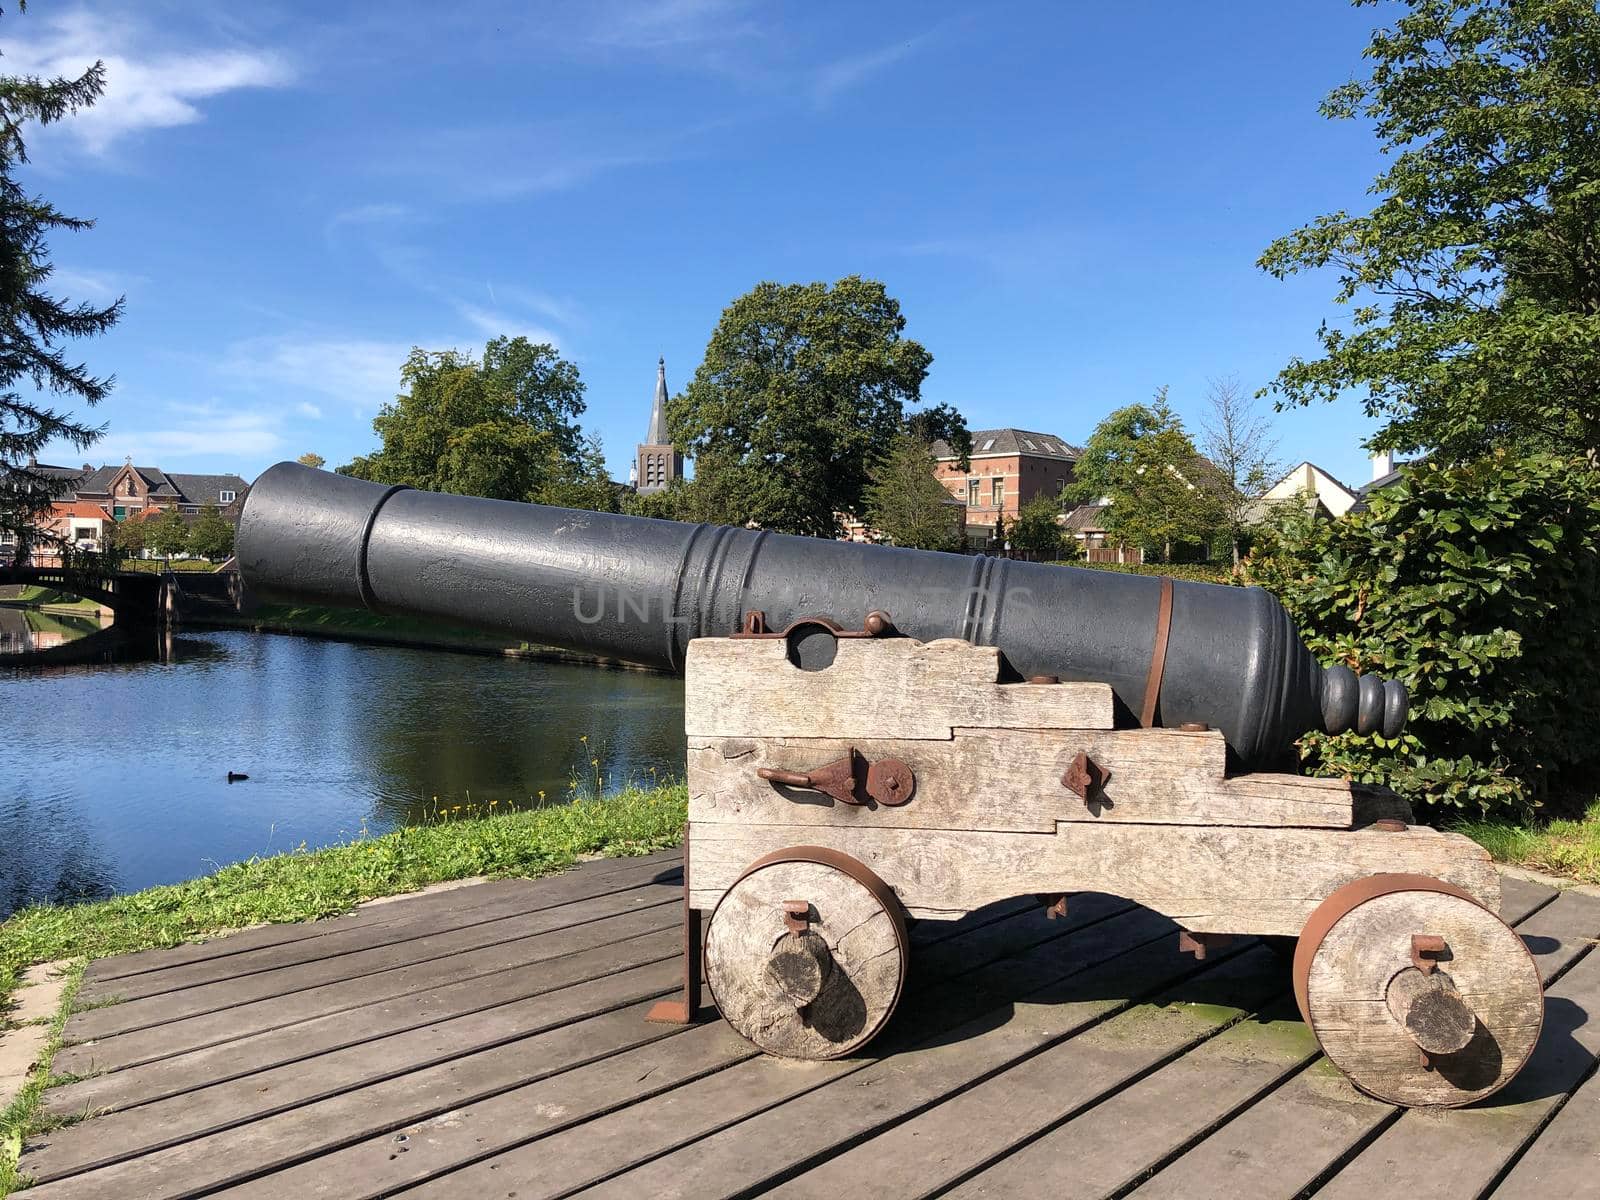 Cannon in Groenlo by traveltelly